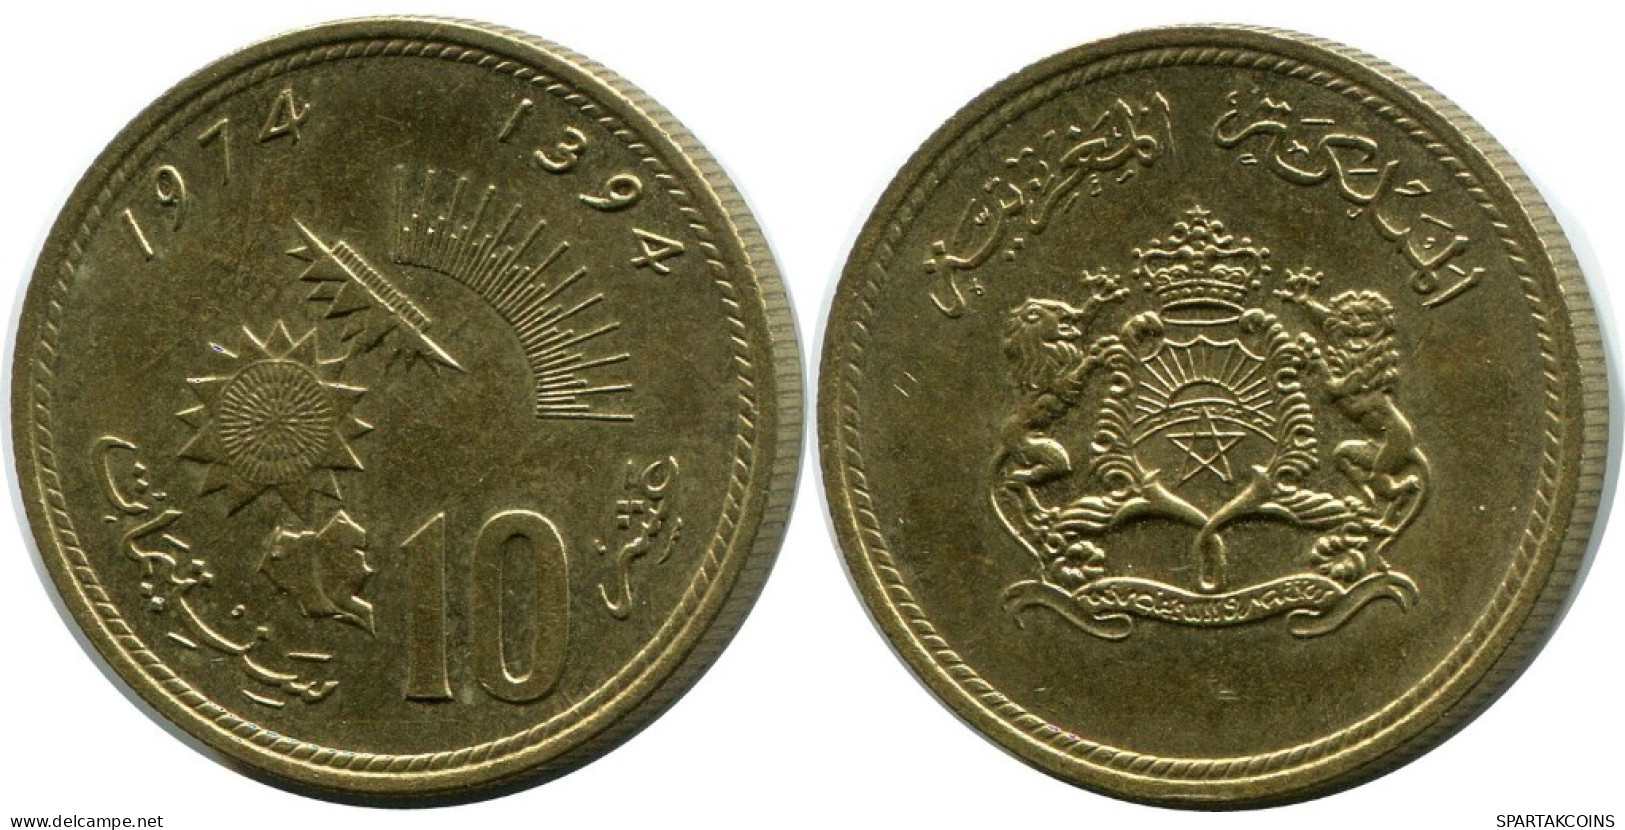 10 CENTIMES 1974 MOROCCO Hassan II Münze #AH841.D.A - Morocco